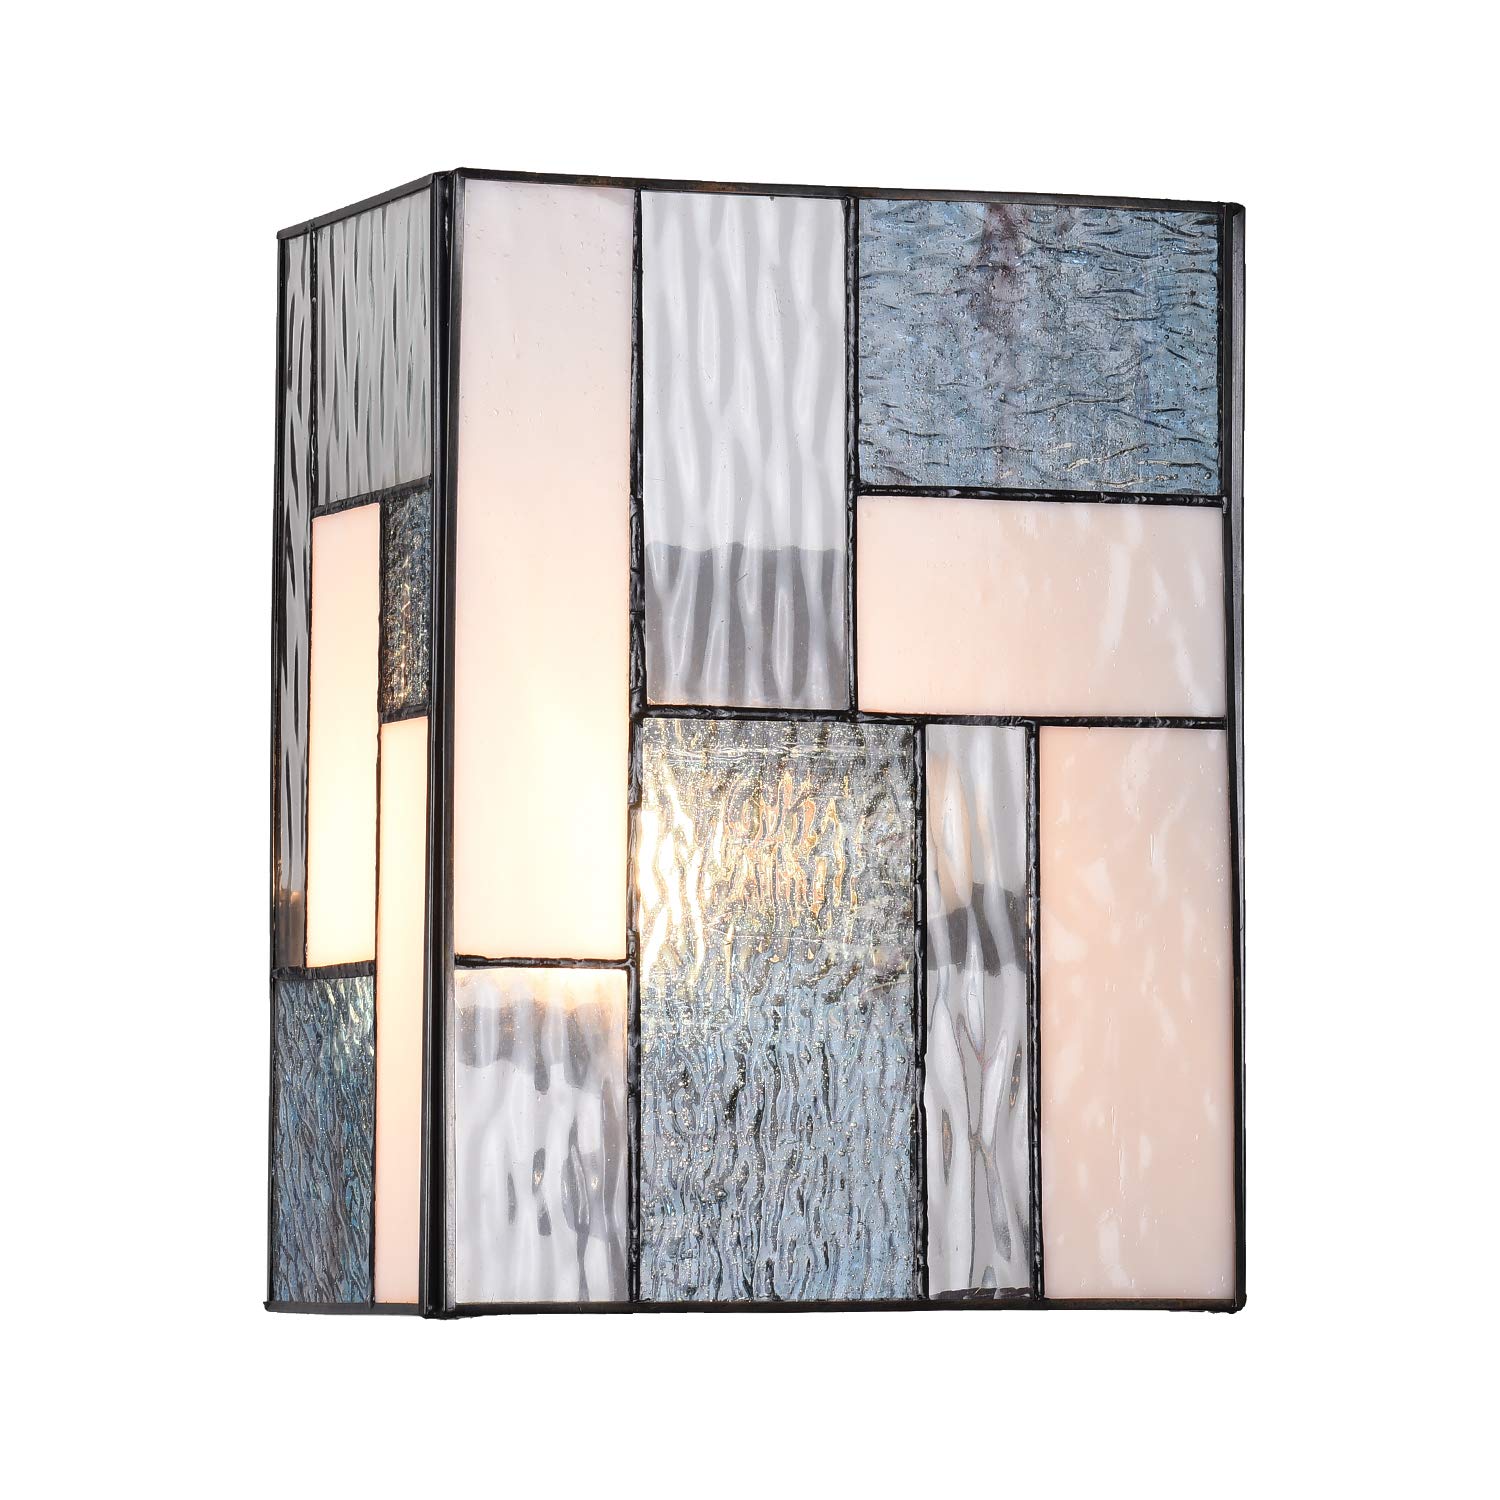 ARTZONE ONE Tiffany Wall Sconces 5.1x7.8x9.8 Inches, Modern Tiffany Style Wall Sconces Stained Glass Wall Light for Bedroom/Bathroom/Livingroom/Corridor/Stairway